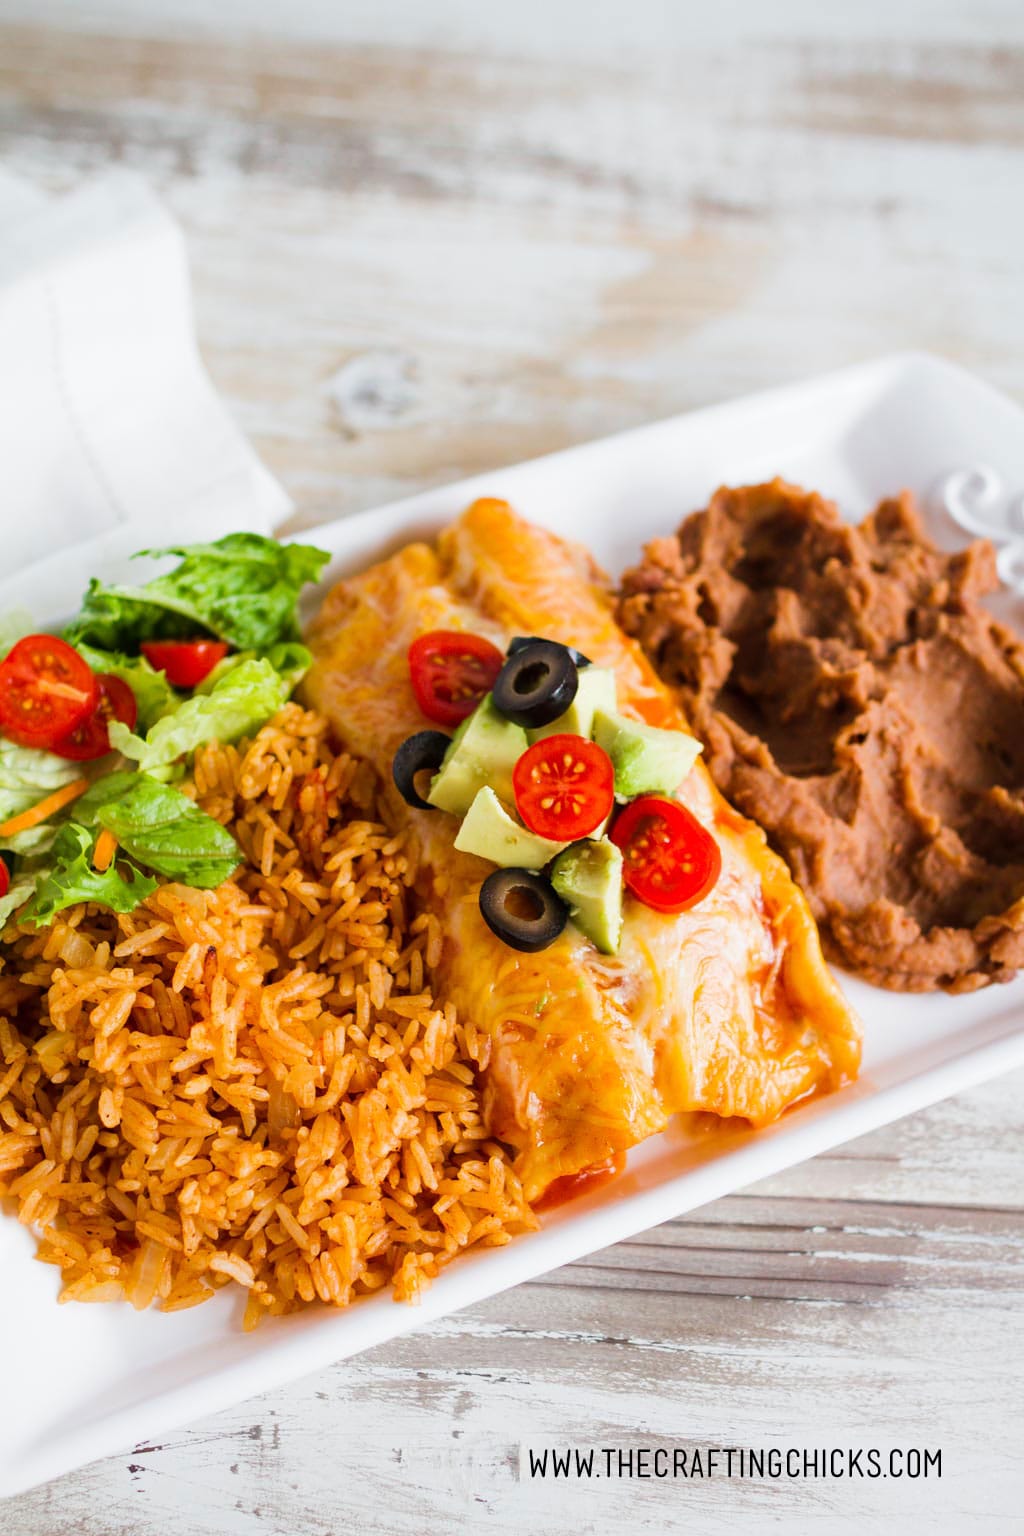 Saw Cooker Salsa Chicken Enchiladas. Serve with Beans salad and rice for a complete meal.